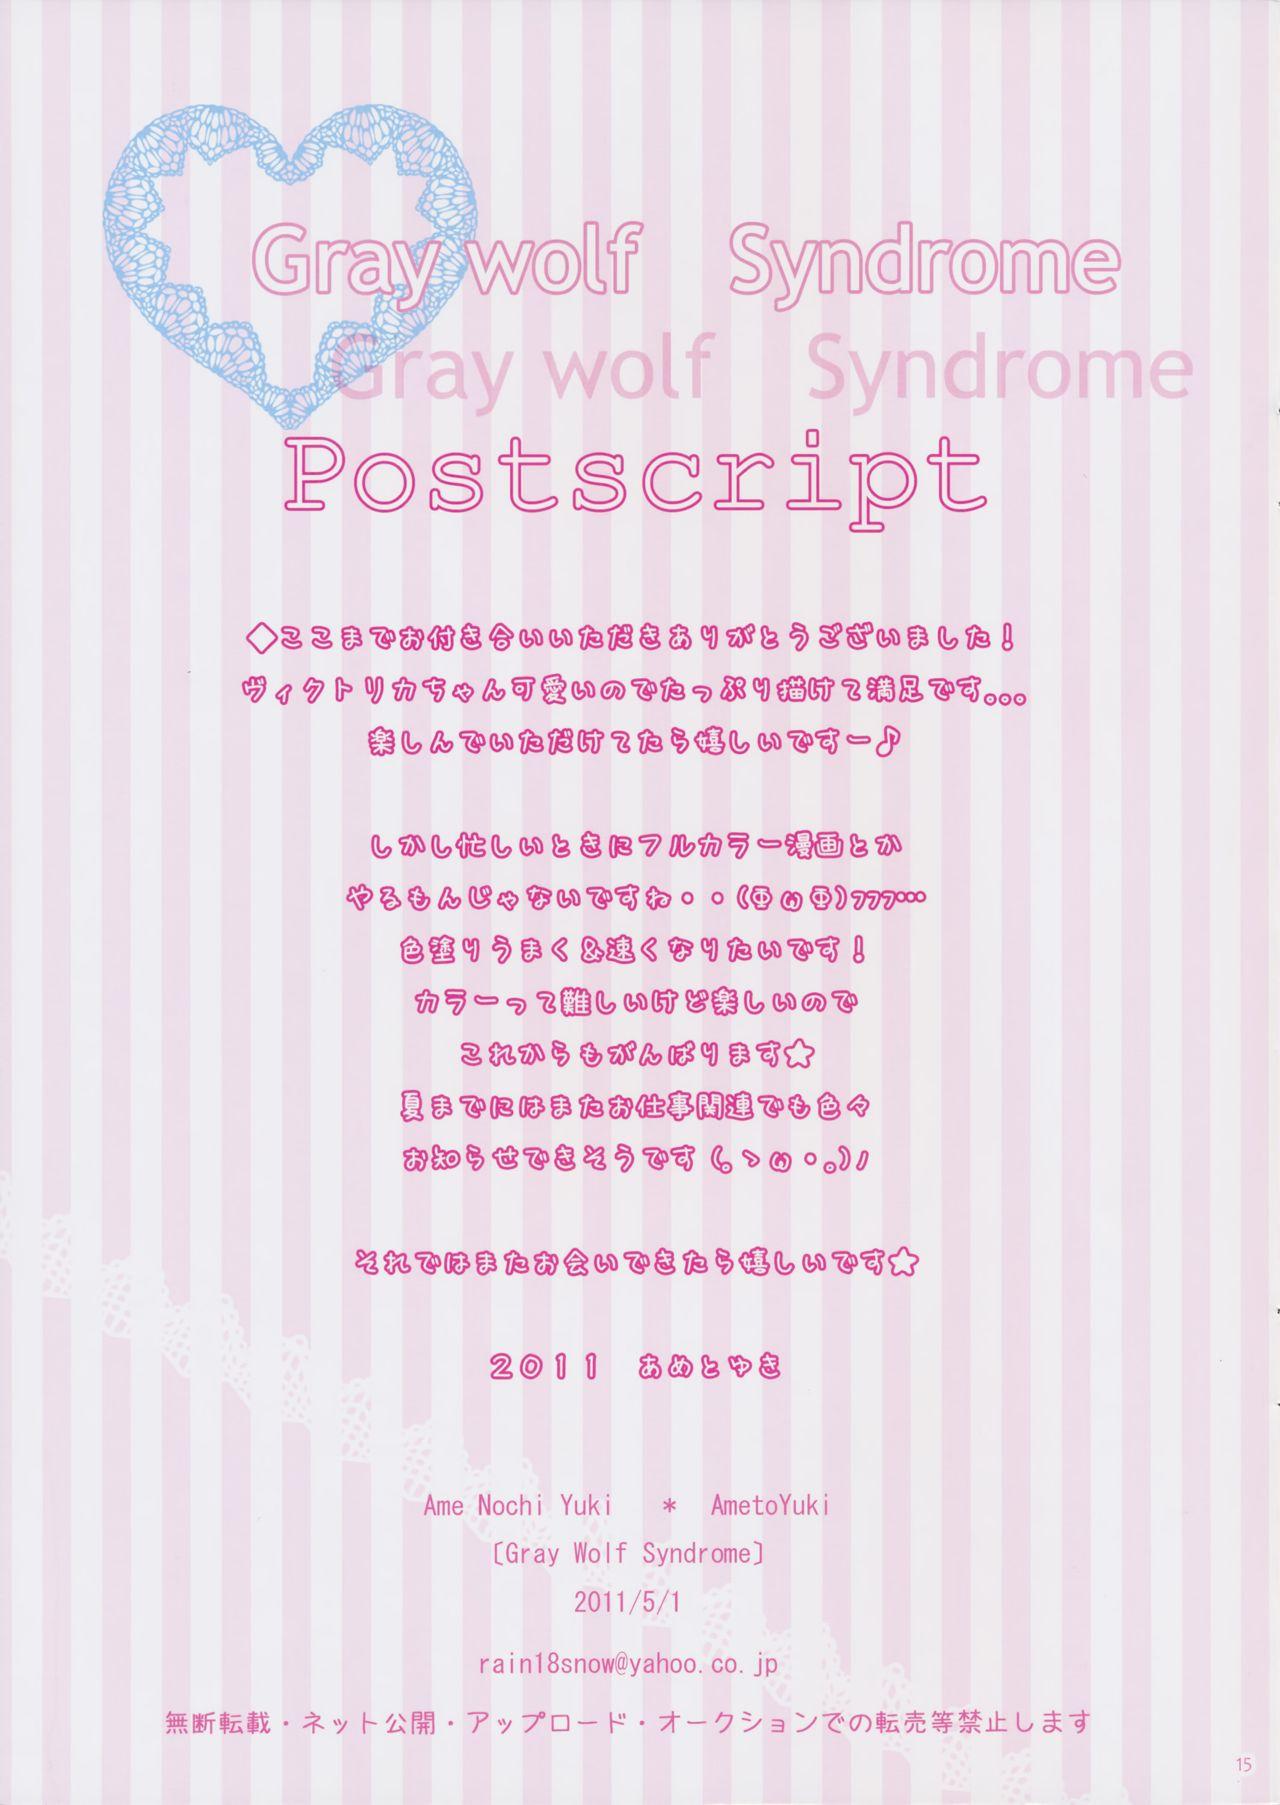 Gray wolf Syndrome 16